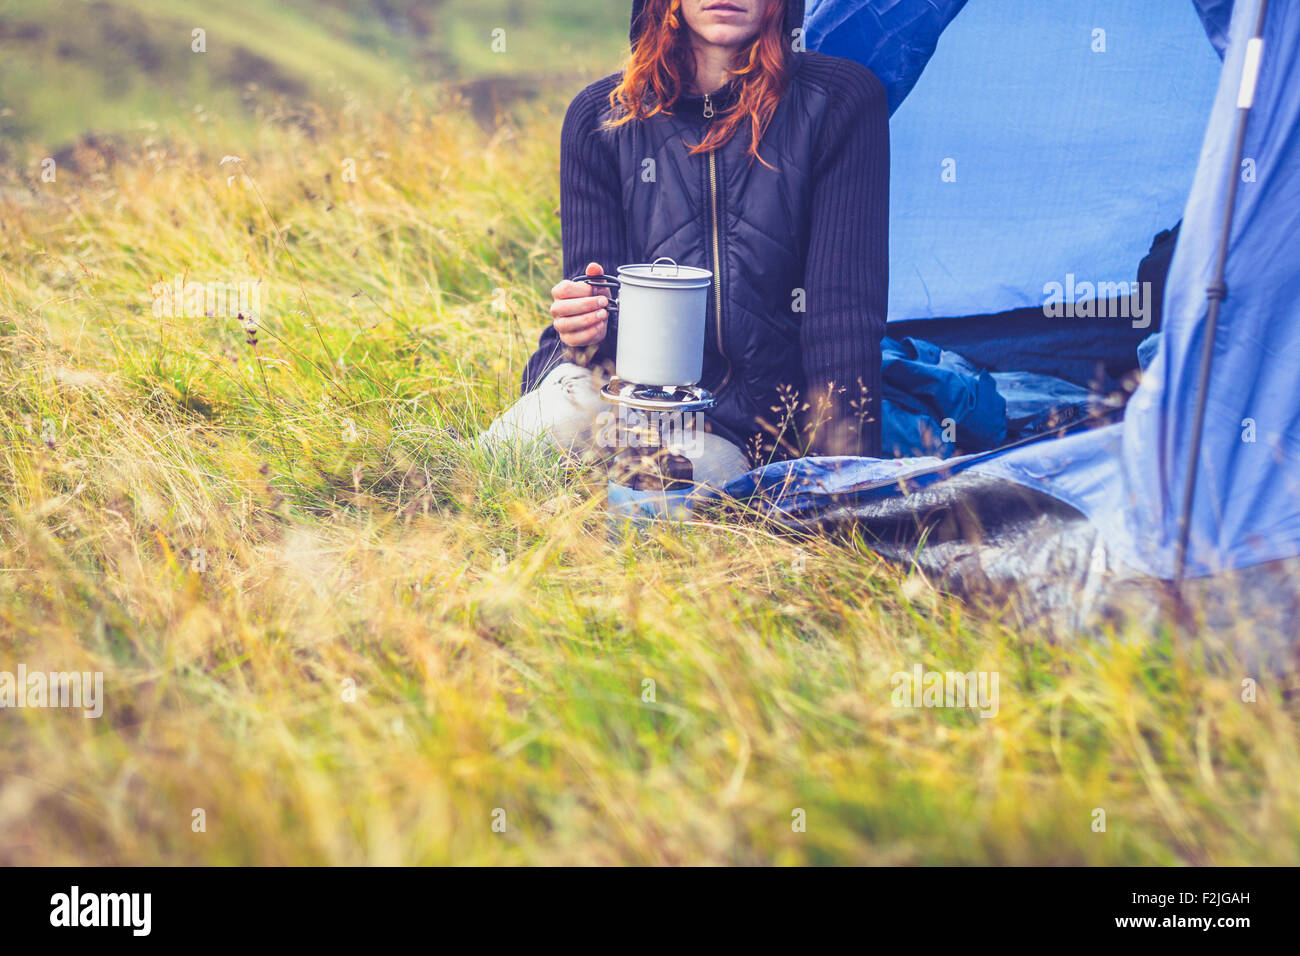 Young woman in tent cooking with portable stove Stock Photo